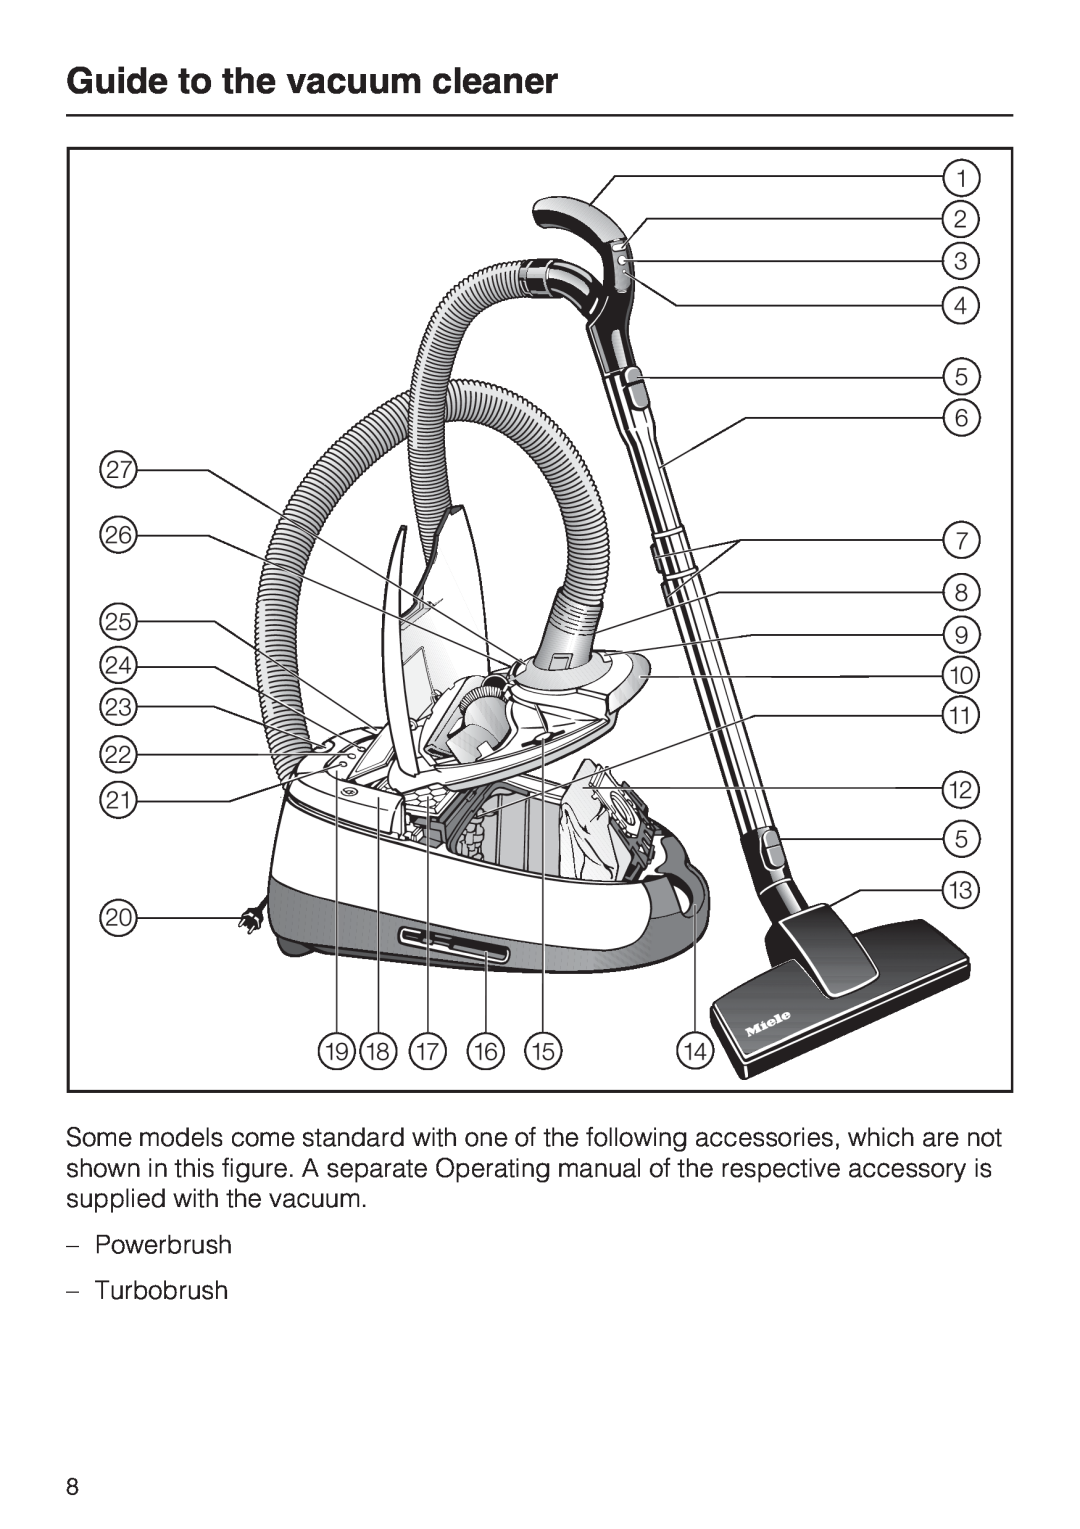 NEC S 5000 operating instructions Guide to the vacuum cleaner, Powerbrush -Turbobrush 